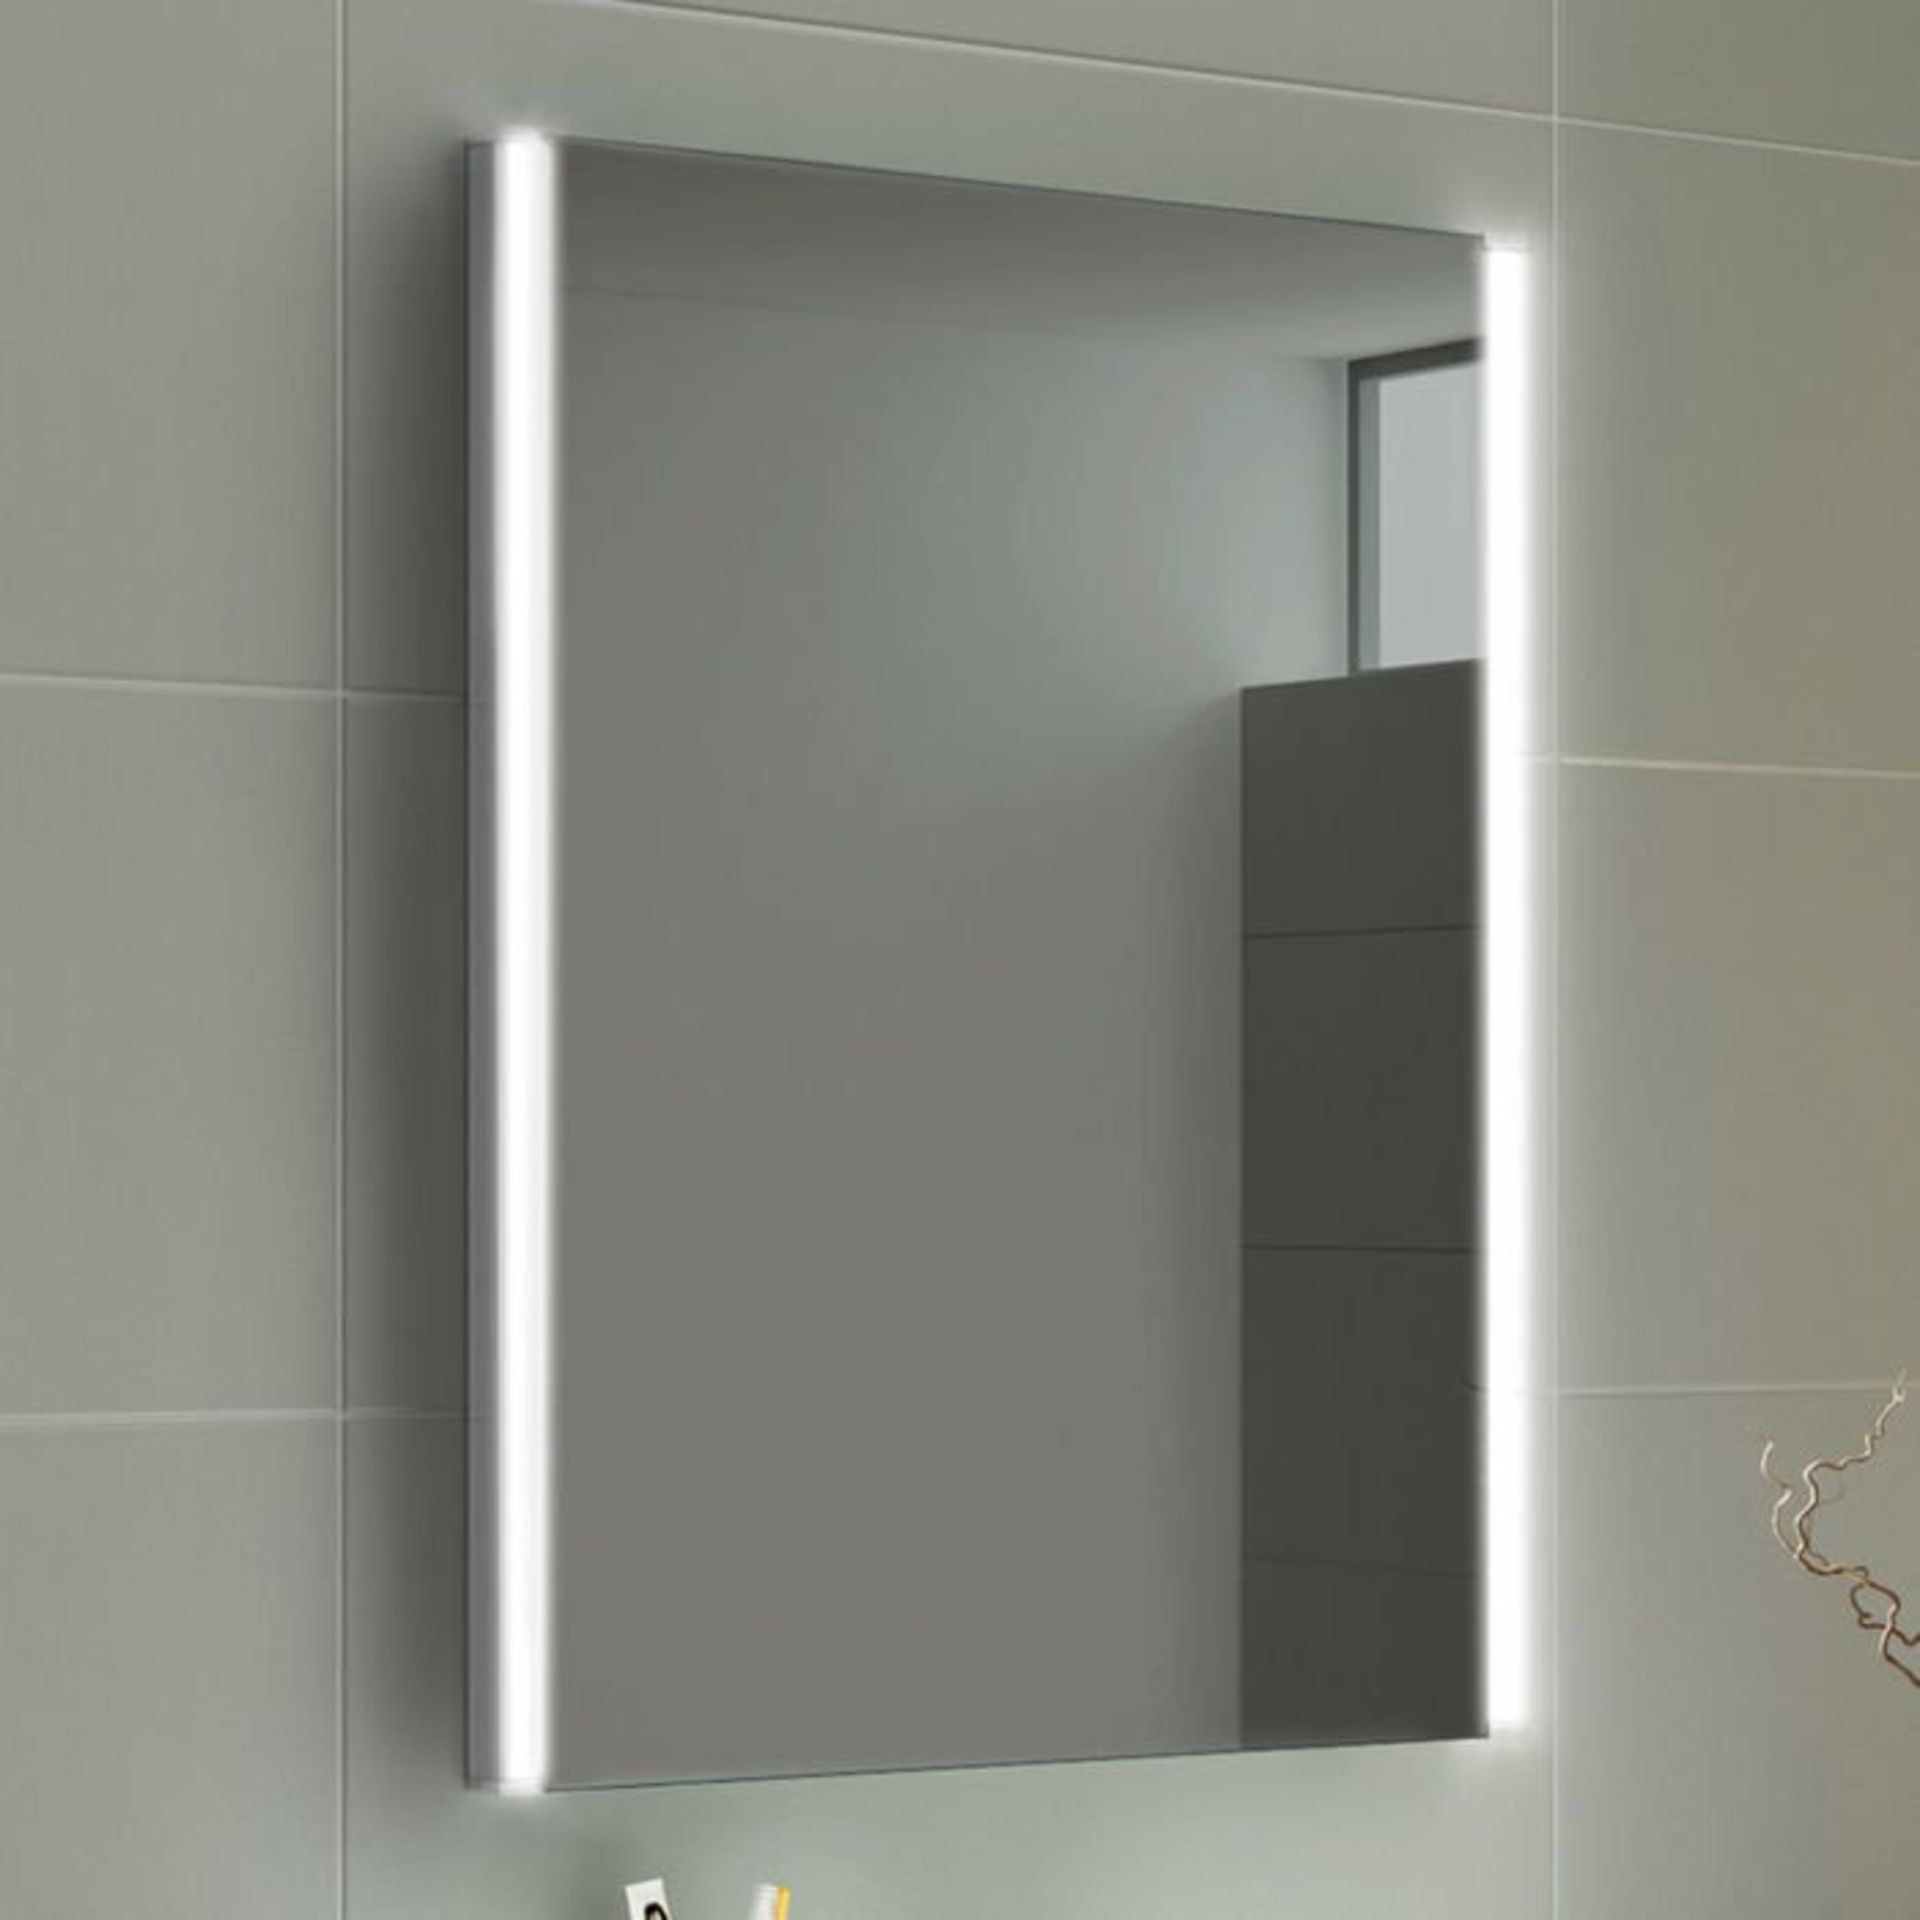 (H209)500x700mm Lunar LED Mirror - Battery Operated. Energy saving controlled On / Off switch - Image 2 of 5